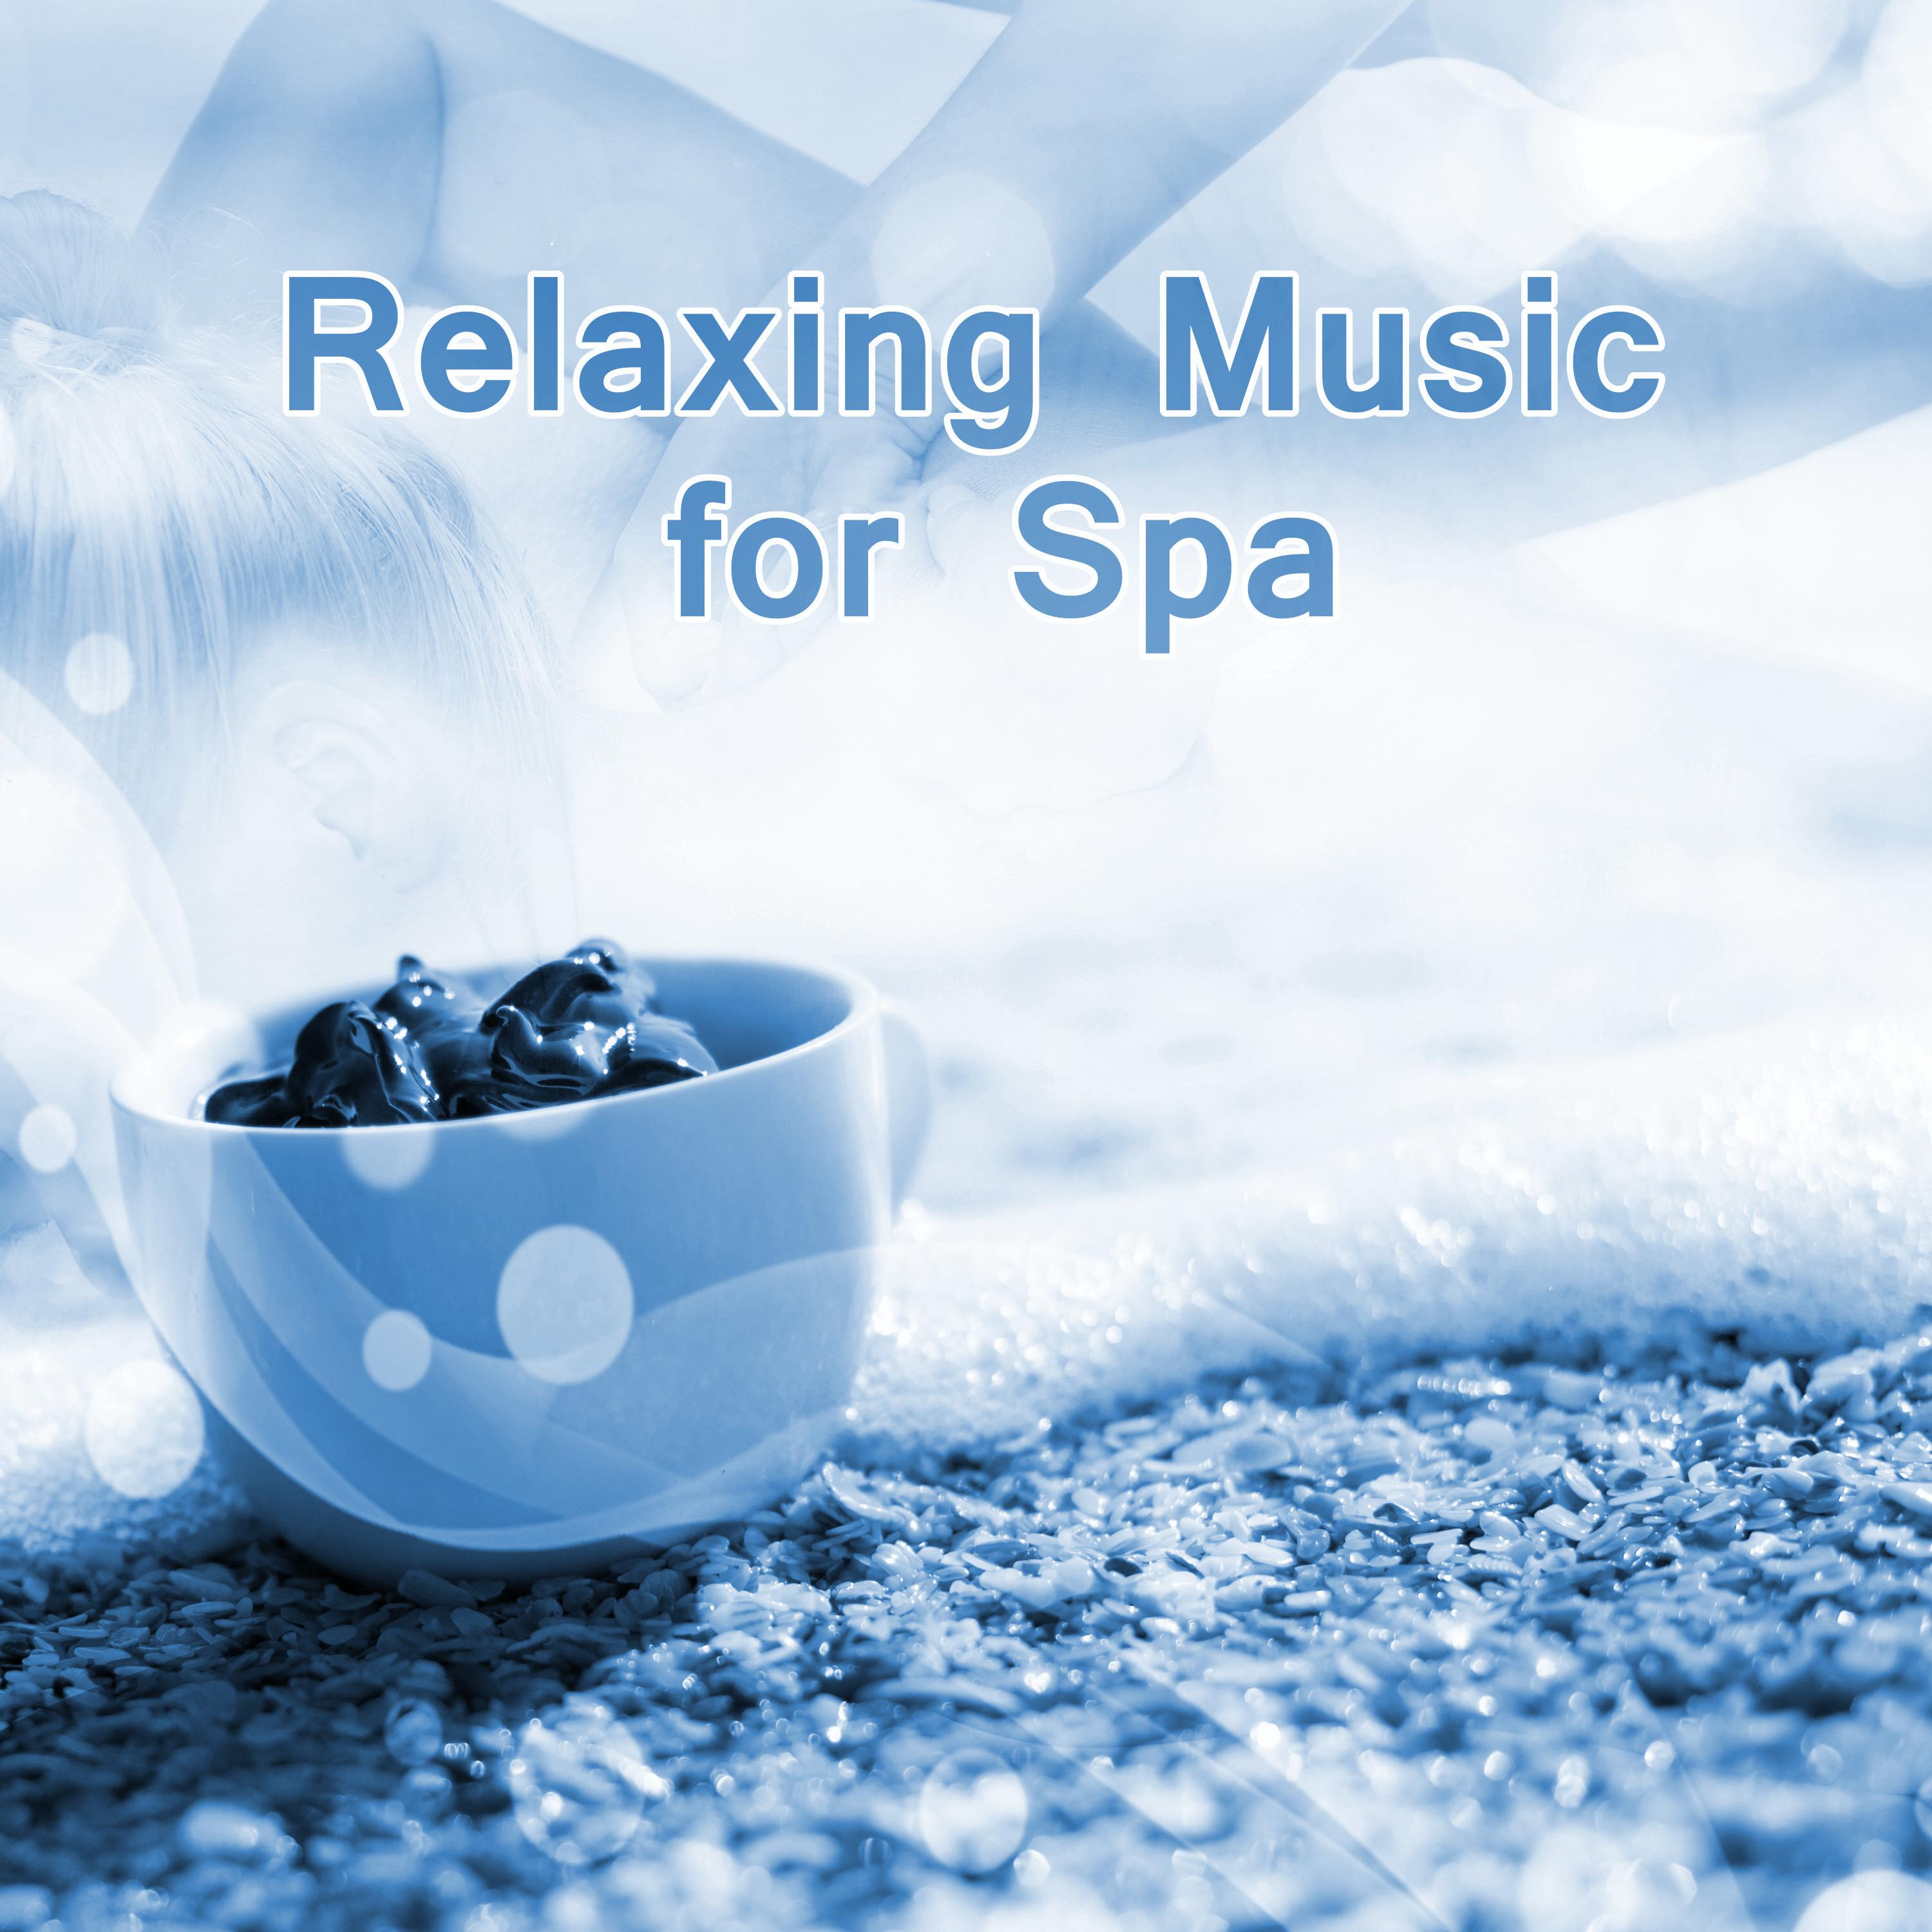 Relaxing Music for Spa  Soothing Waves, Beautiful Spa Music, Relaxing Massage, Sauna Relaxation